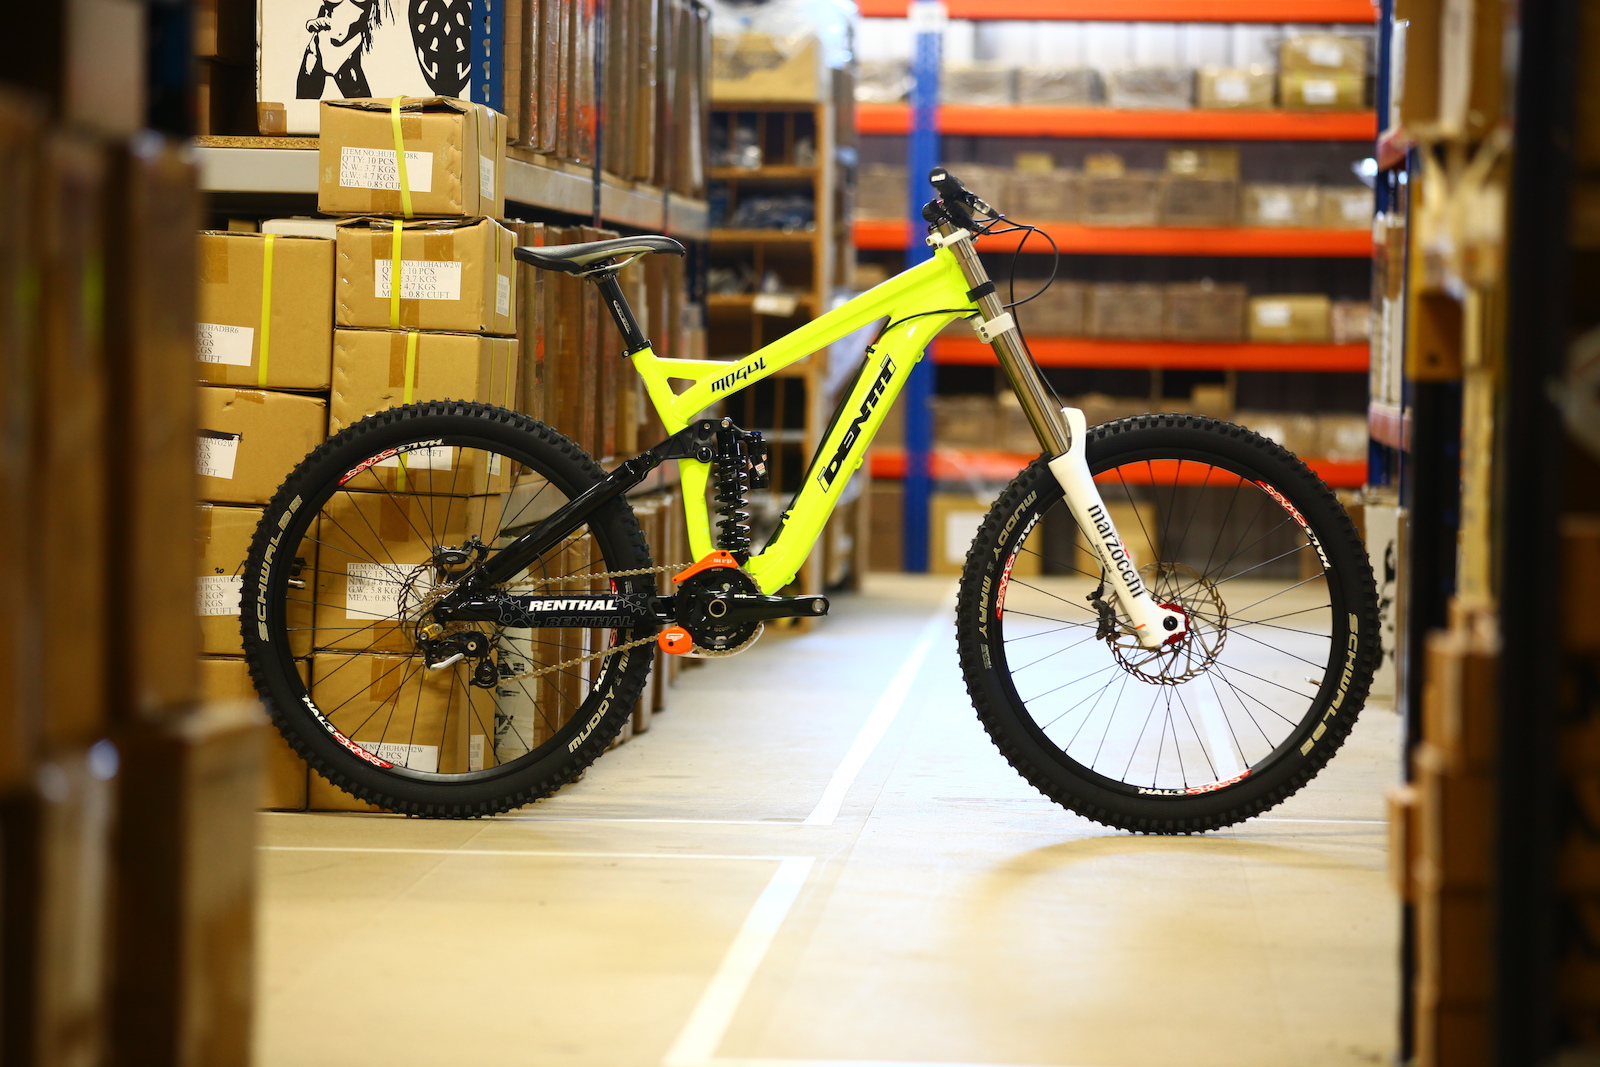 See this bike in action this weekend at the Halo BDS
The frame retails for £1099
7.5" travel
64" head angle 
150mm rear 
9lbs for the frame and shock 
Rock Shox Vivid R2C coil shock